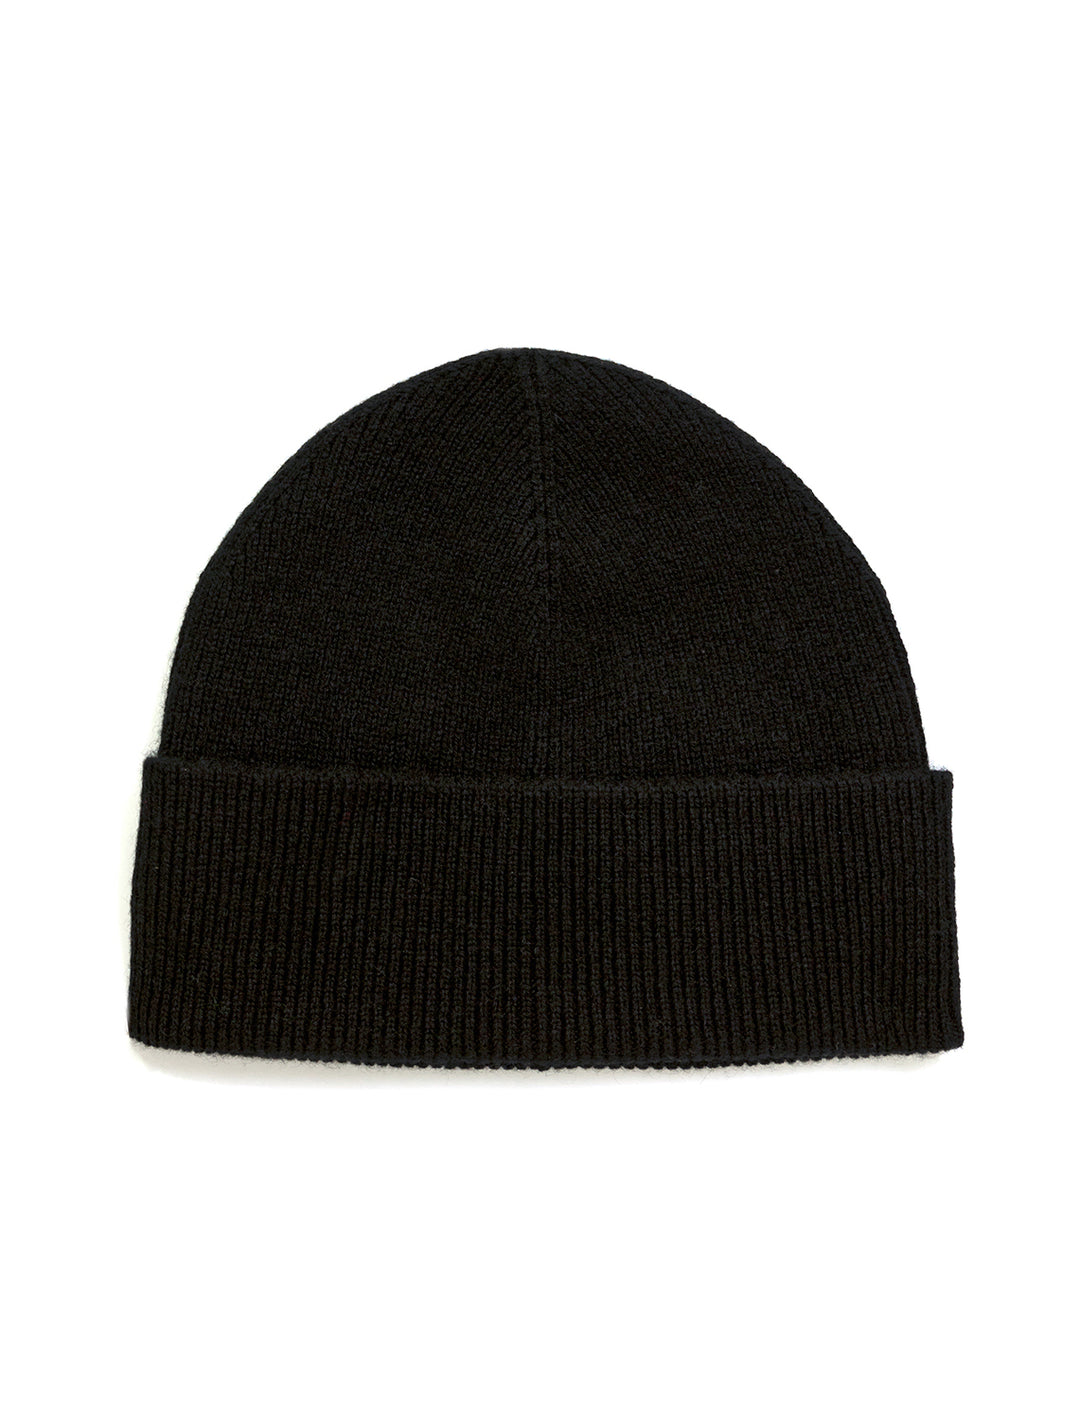 Front view of Jumper 1234's ribbed turnback hat in black.